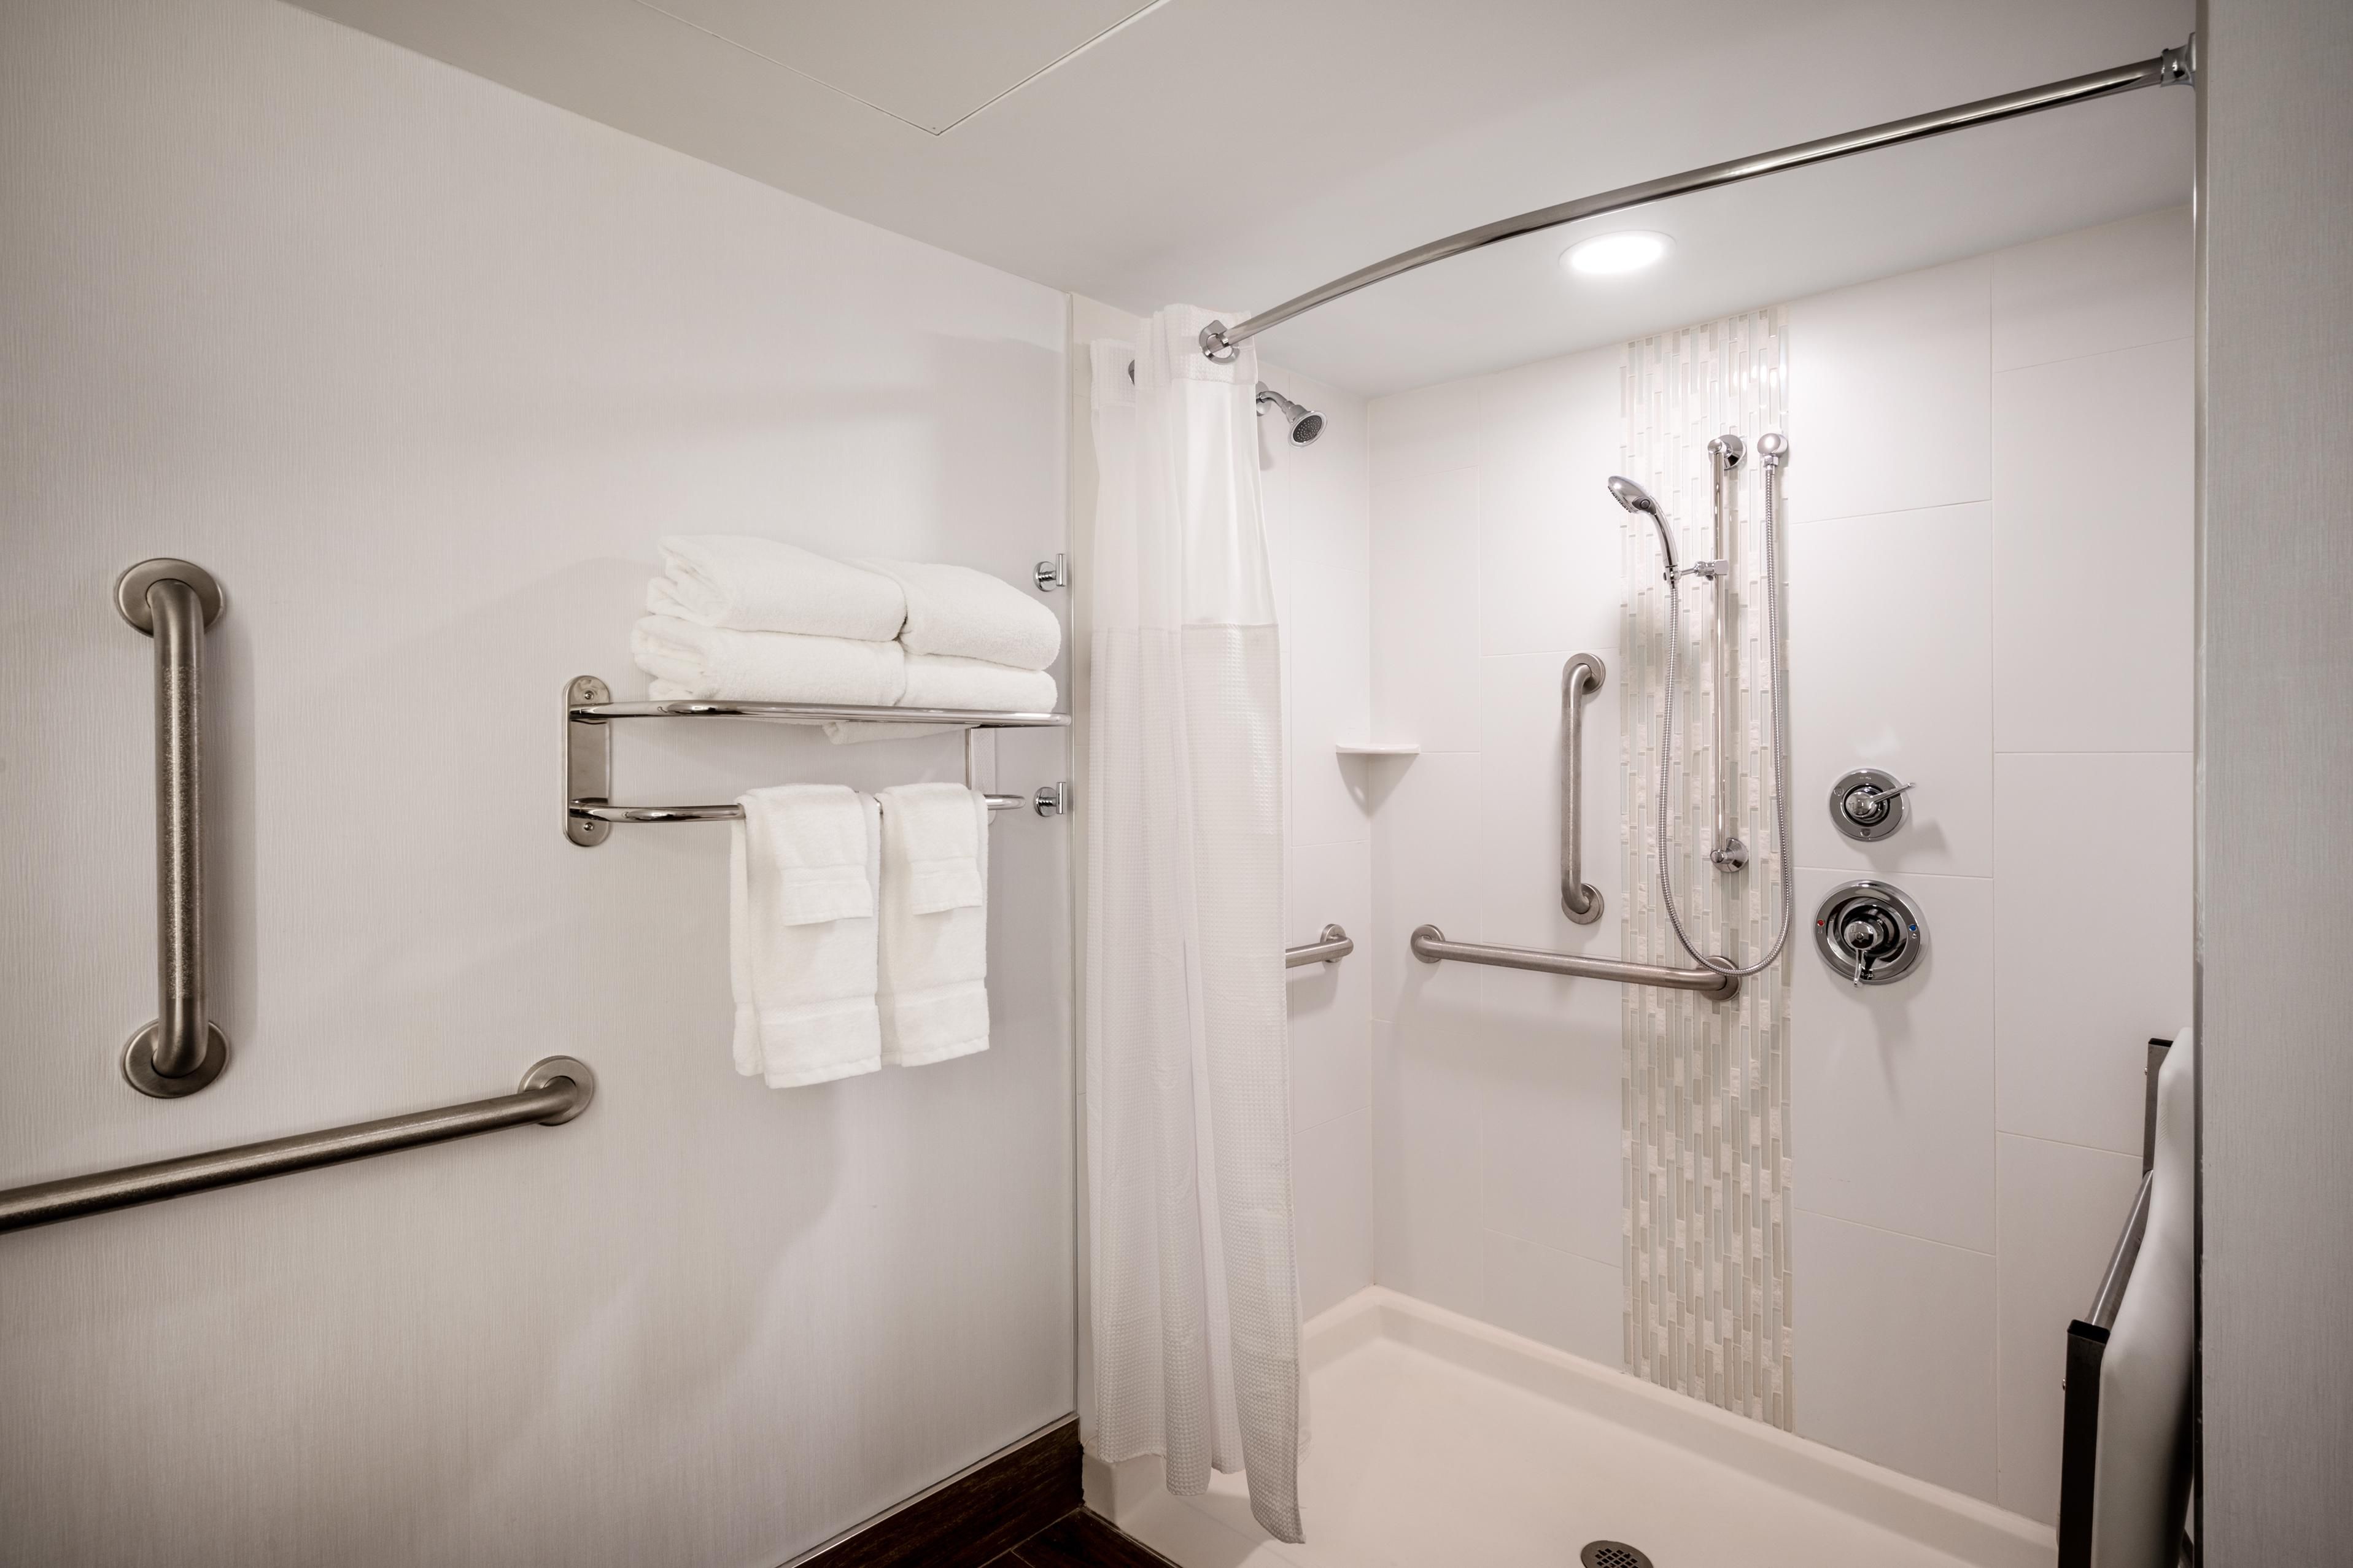 ADA/handicap accessible guest bathroom with roll-in shower